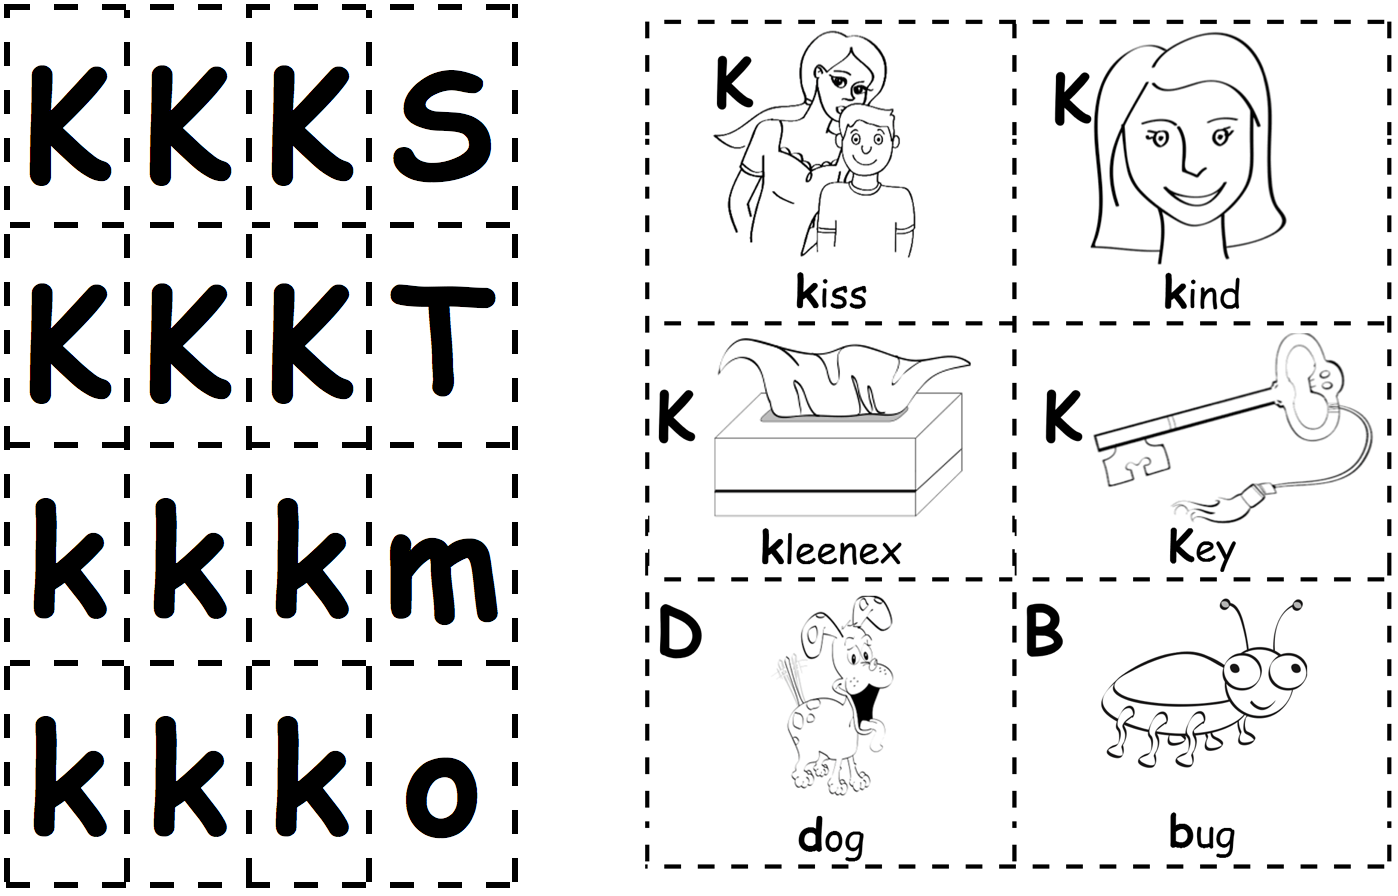 Kindergarten-Kit-Pictures-and-Letter-Cards